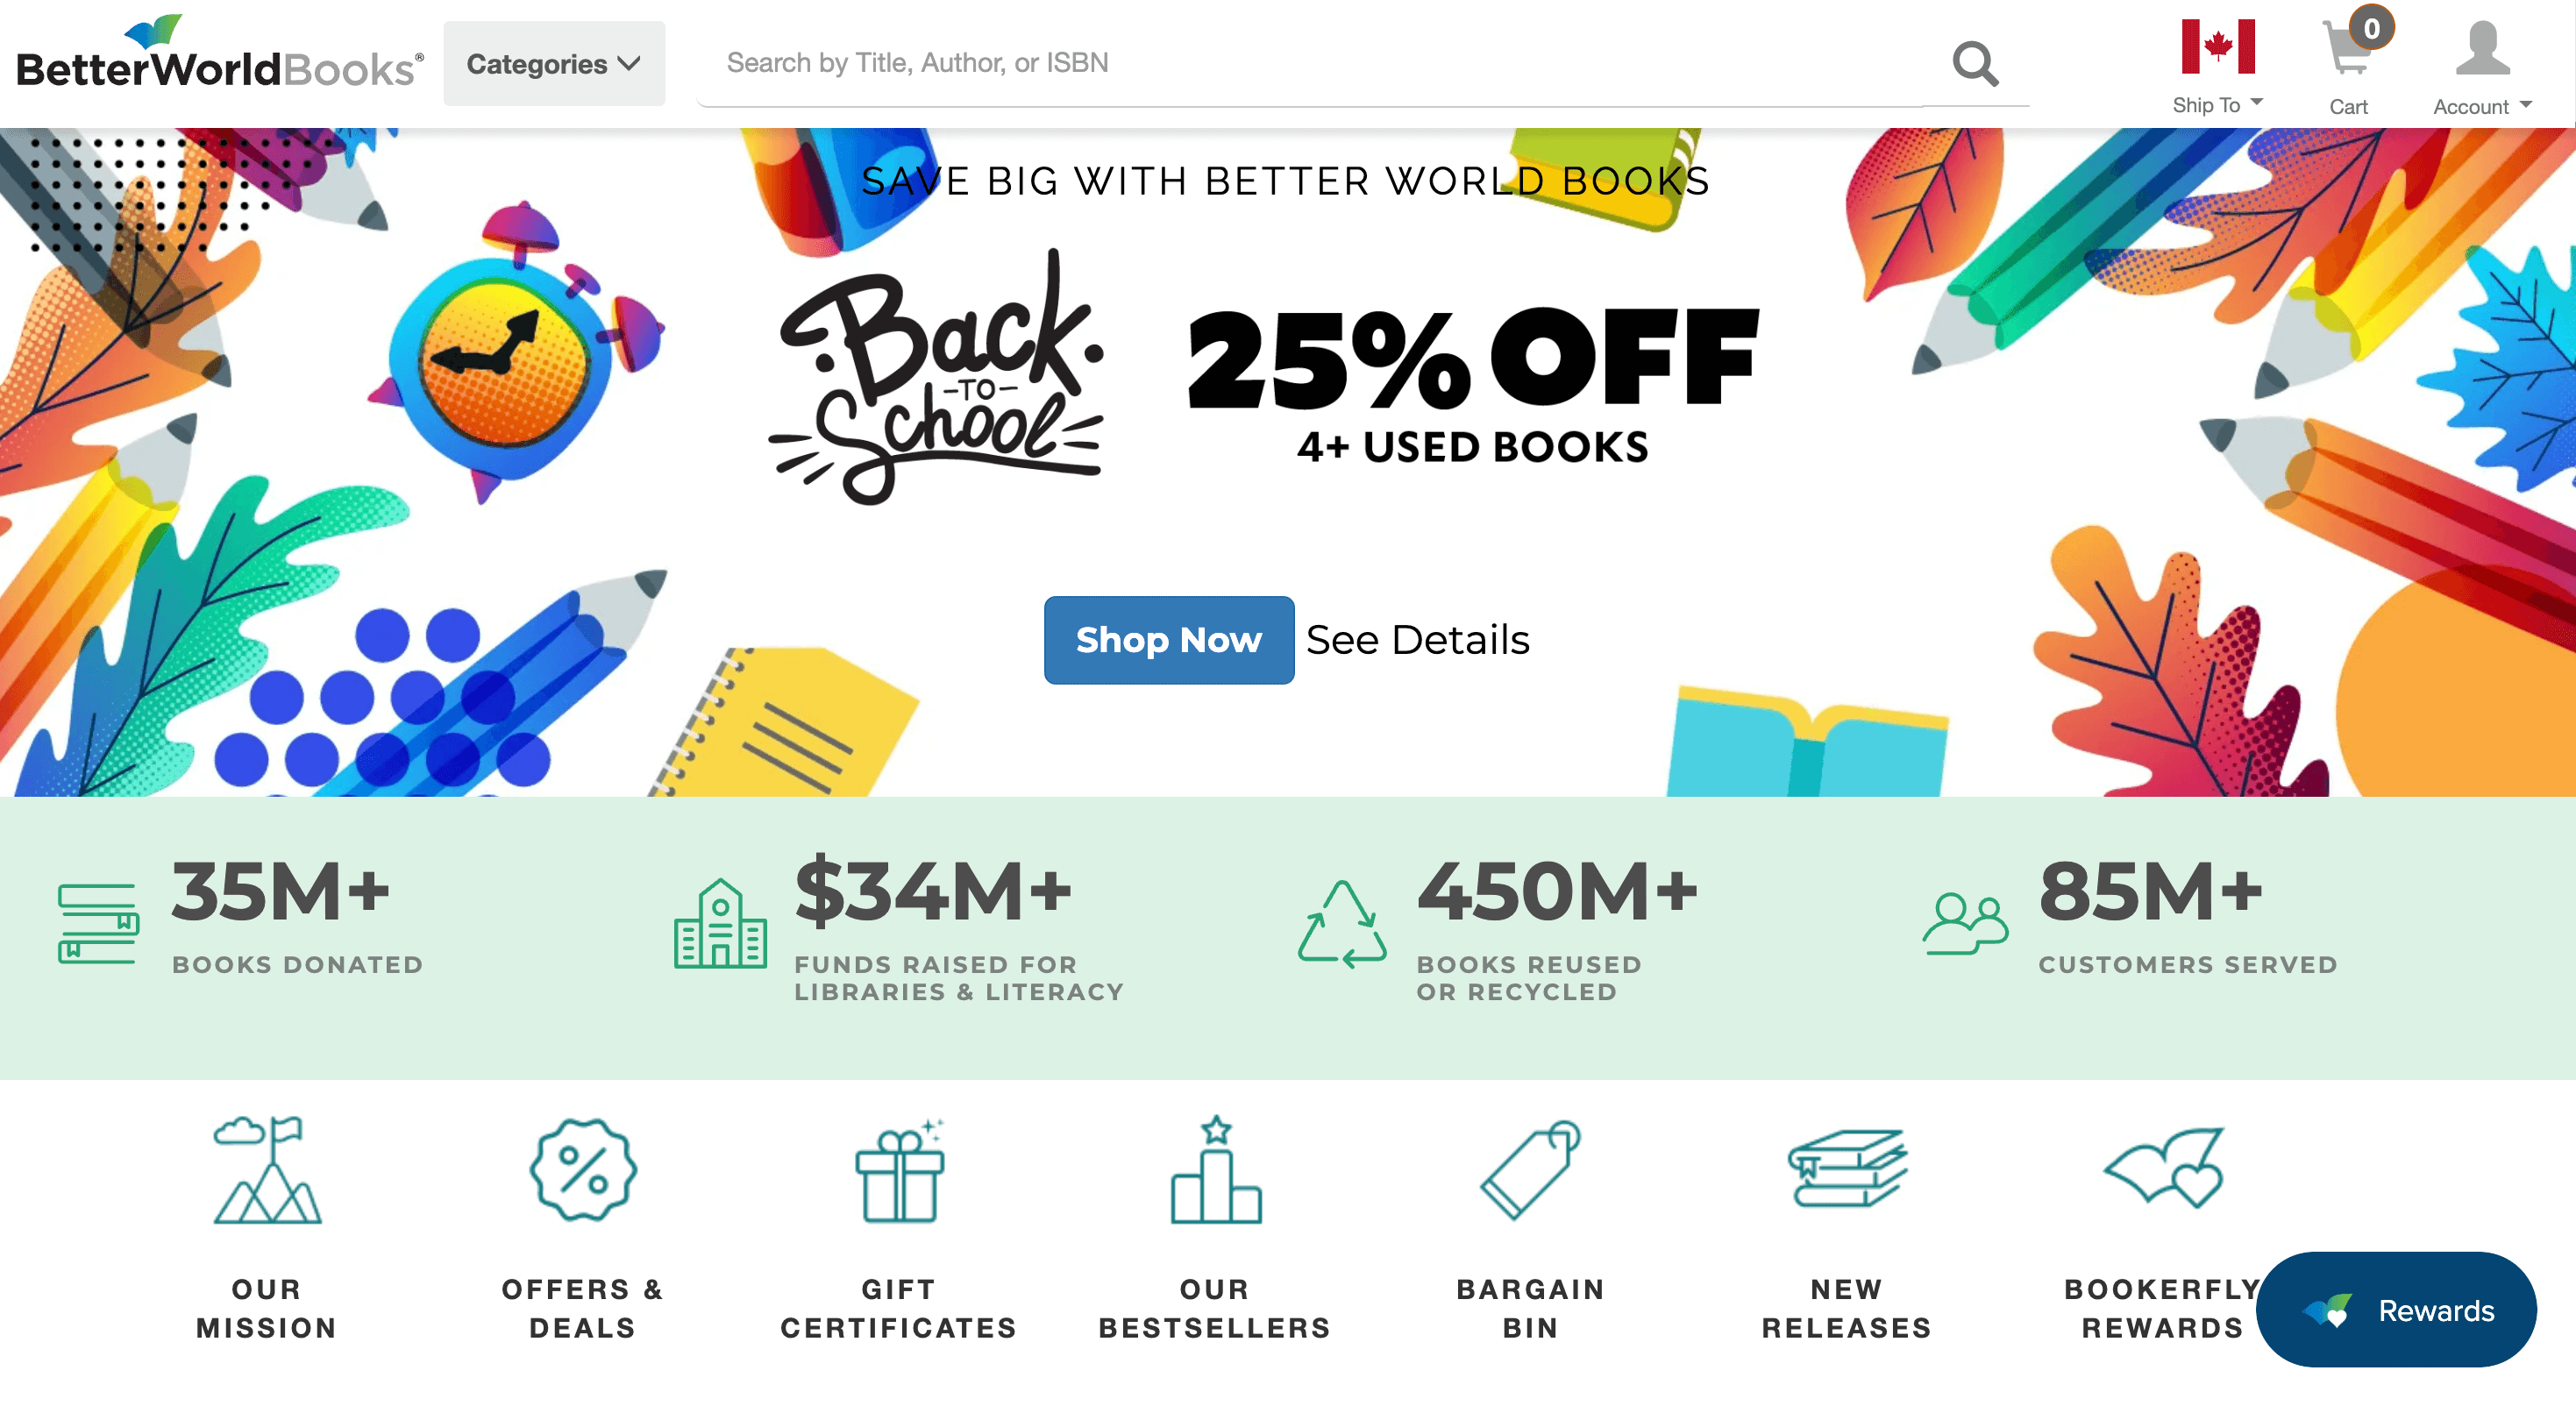 A screenshot of Better World Books’ homepage, highlighting its social initiatives such as 35 million books donated, $34 million in funds raised for libraries and literacy, 450 million books reused or recycled, and 85 million customers served. 